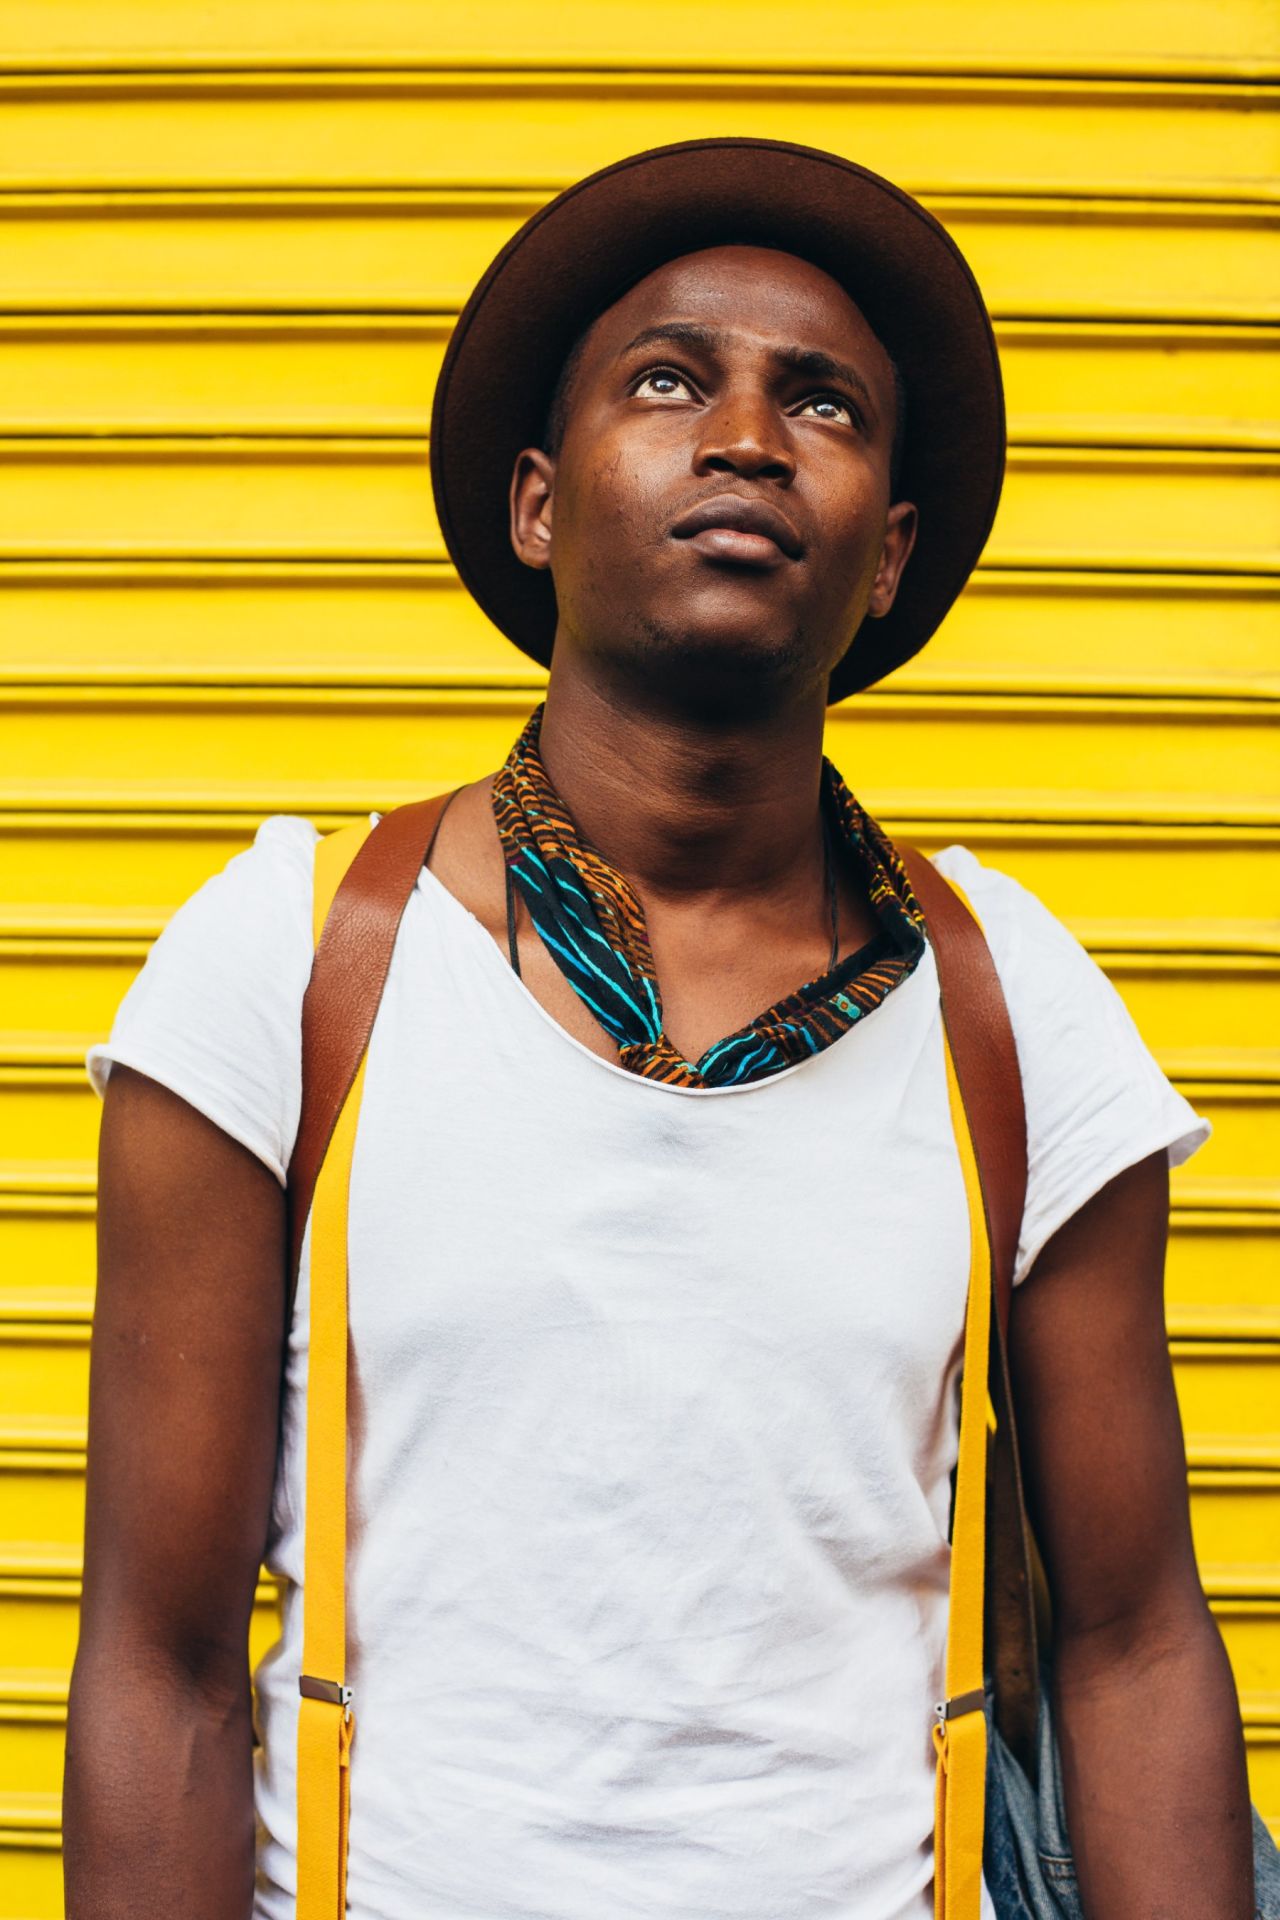  Kiongera Ndugire is a stylist and freelance model working in Nairobi. He often tweets on the latest fashion shows.